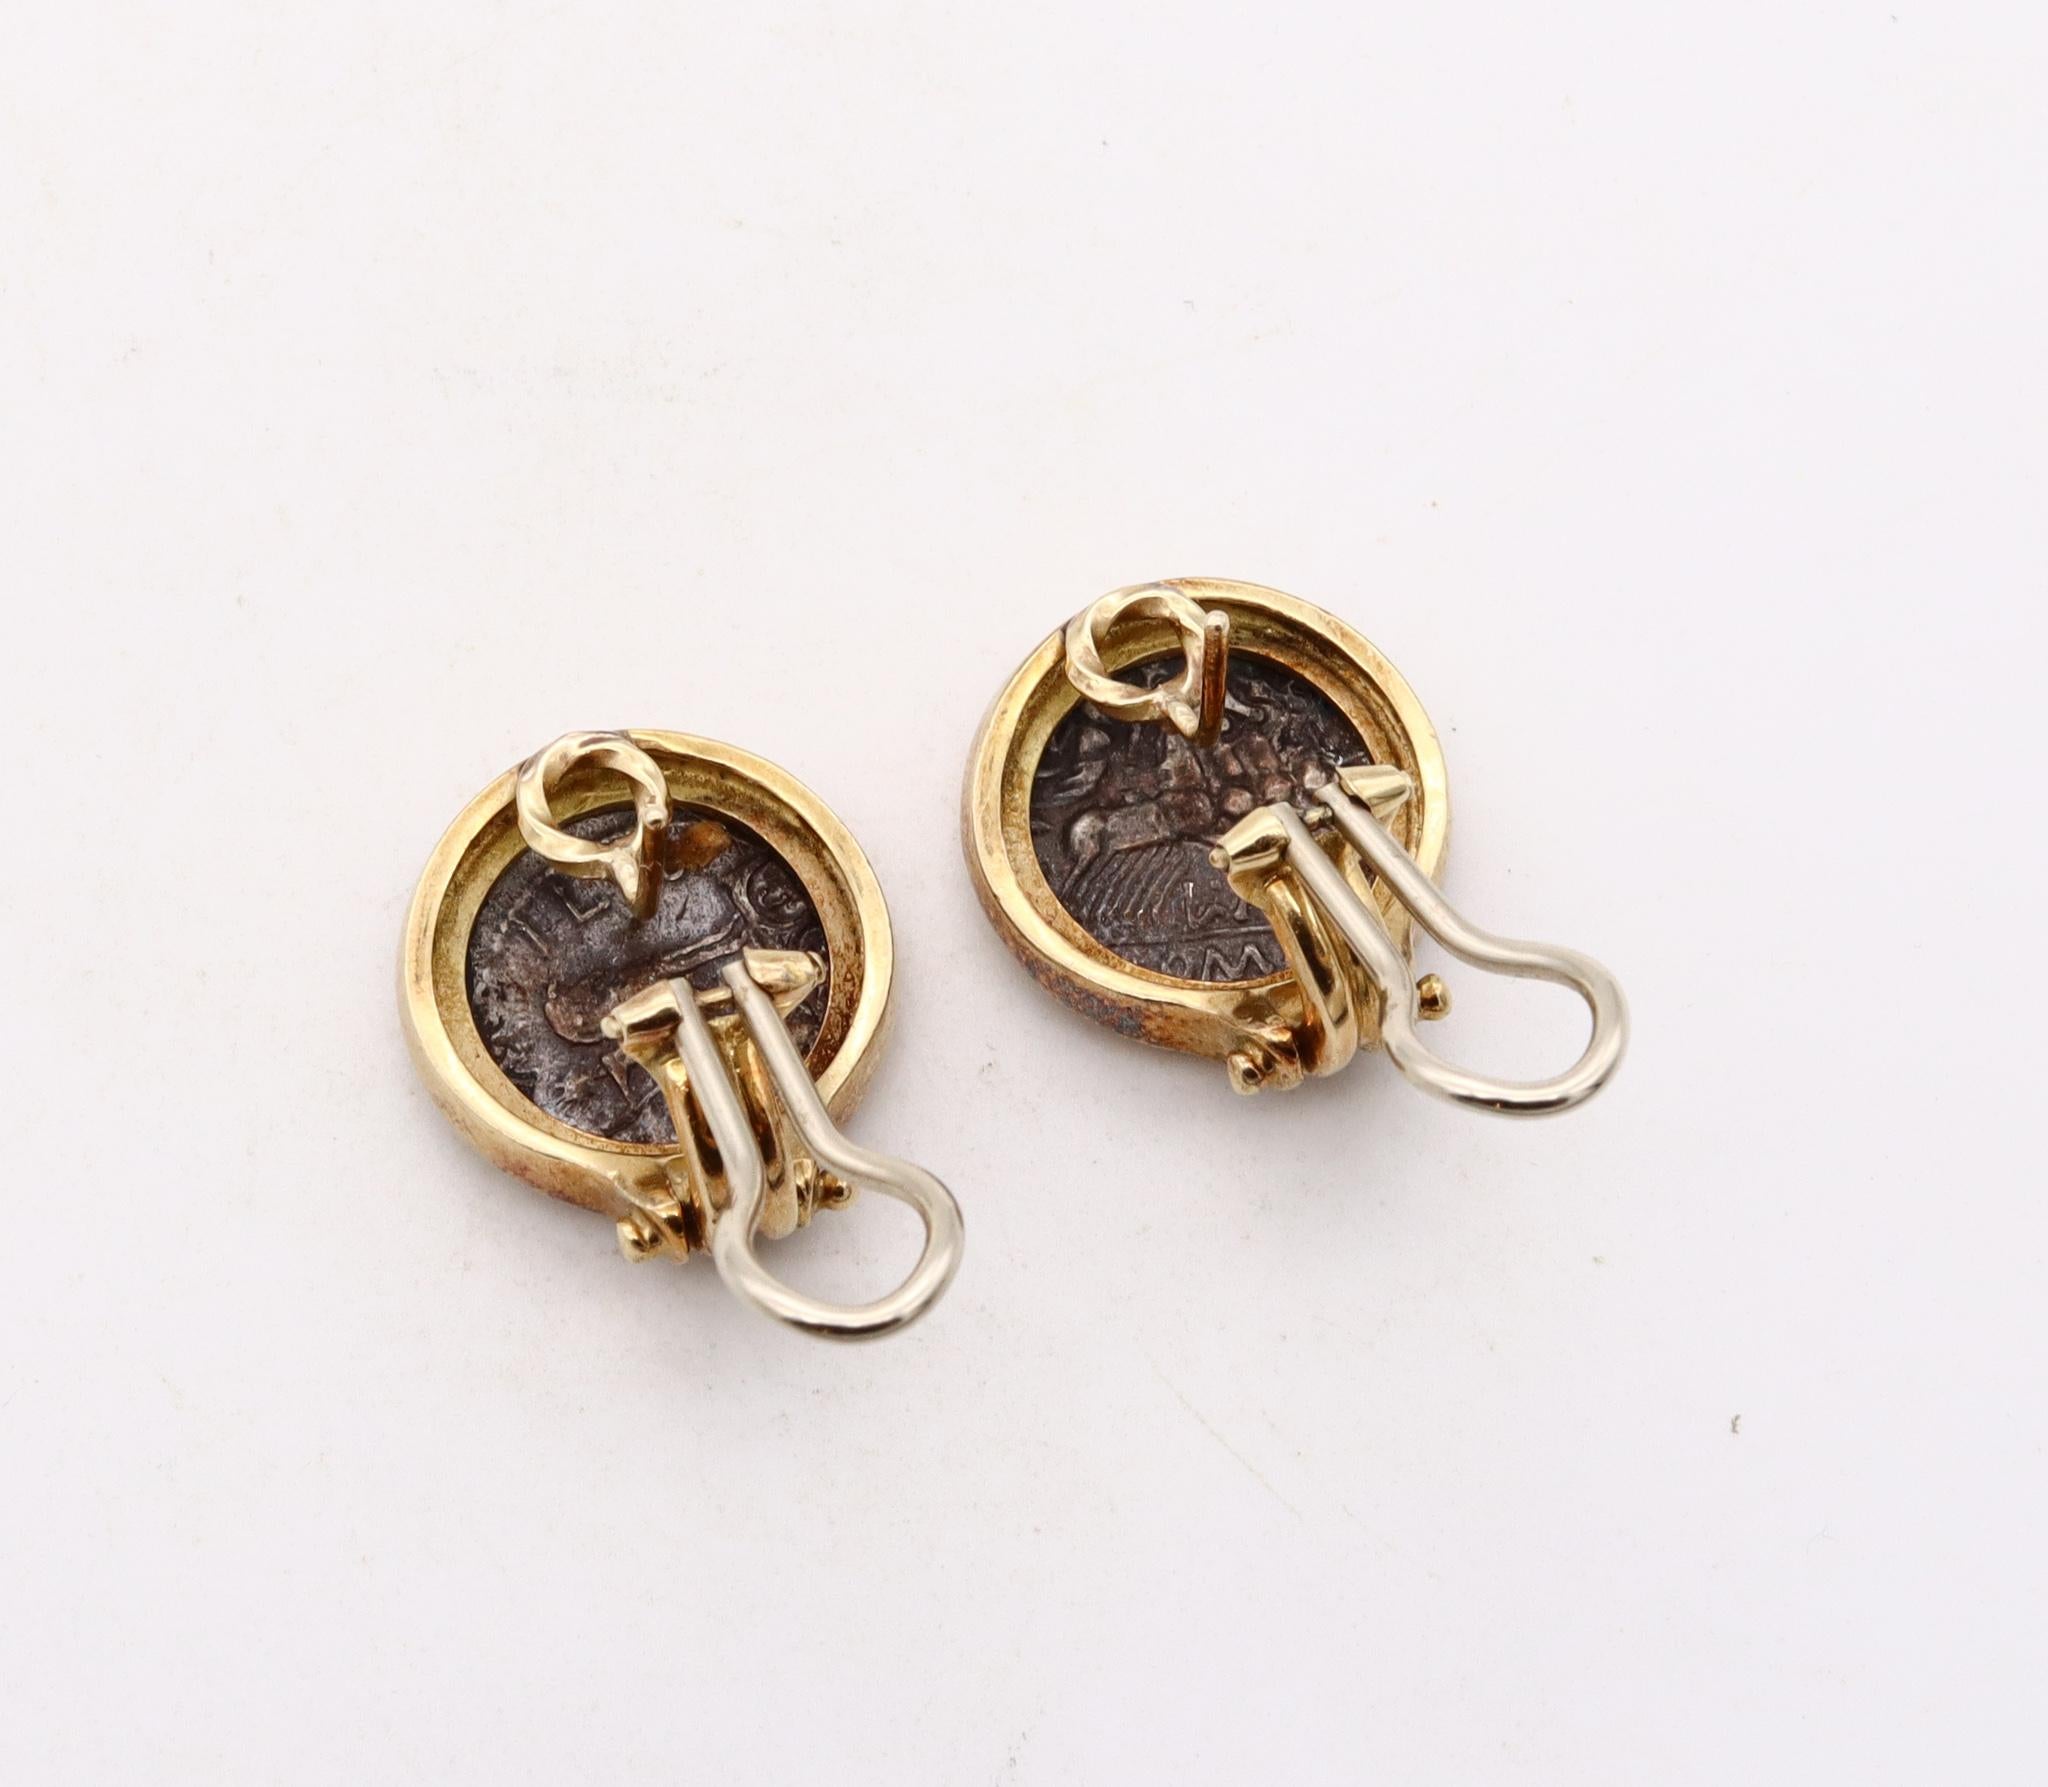 Classical Roman Ancient Roman Coin Earrings in 18kt Yellow Gold with 136-114 BC Silver Denarius